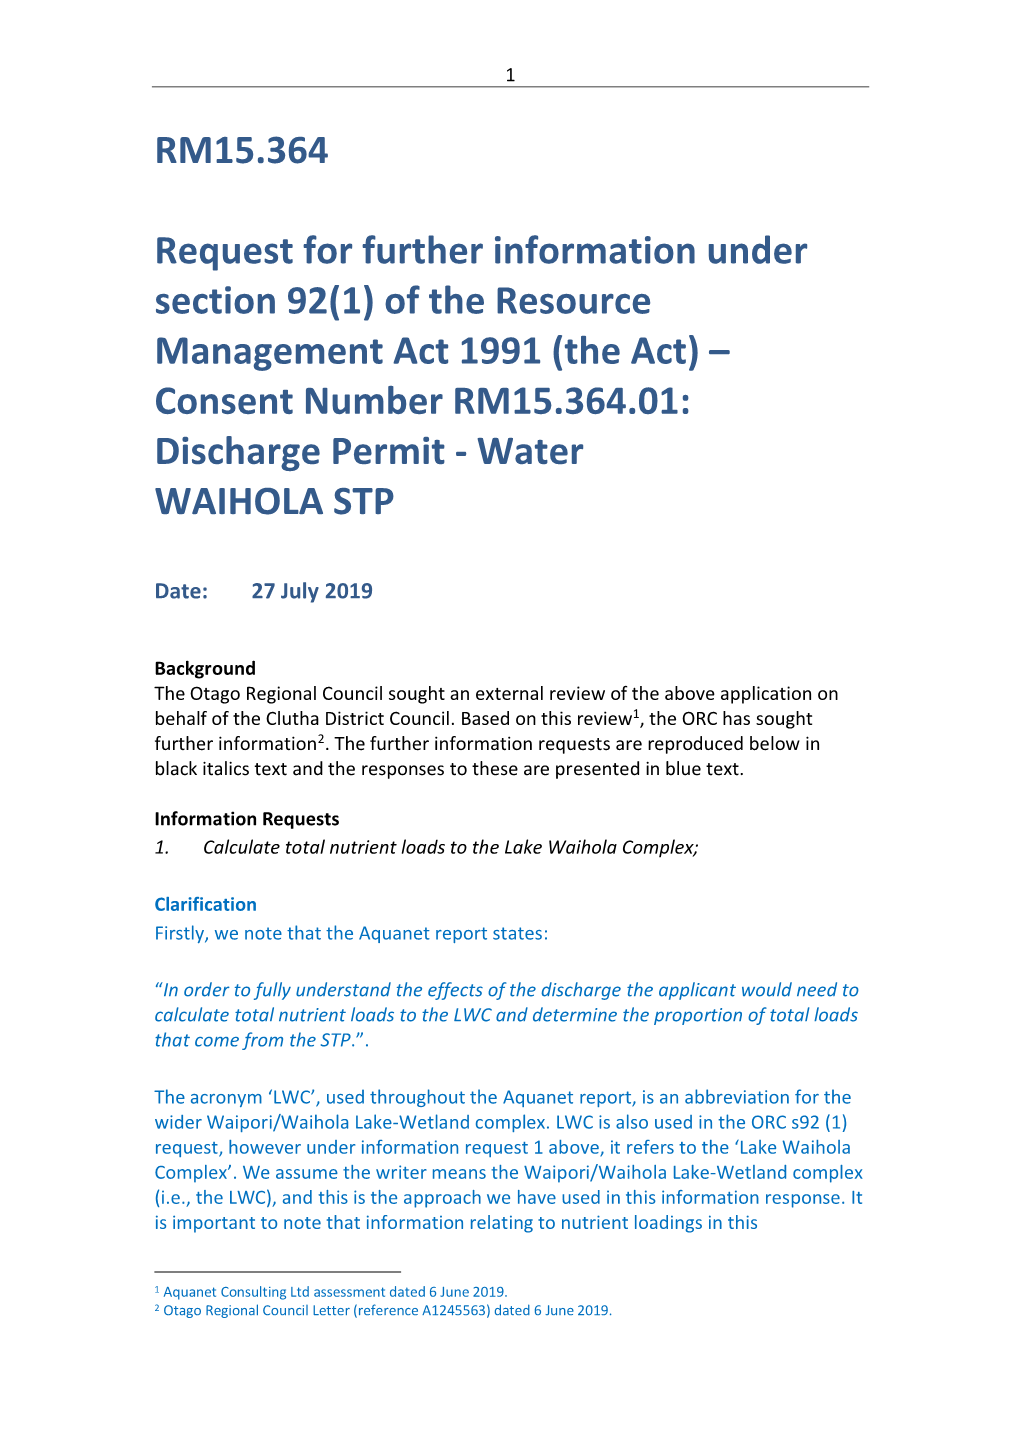 RM15.364 Request for Further Information Under Section 92(1) Of